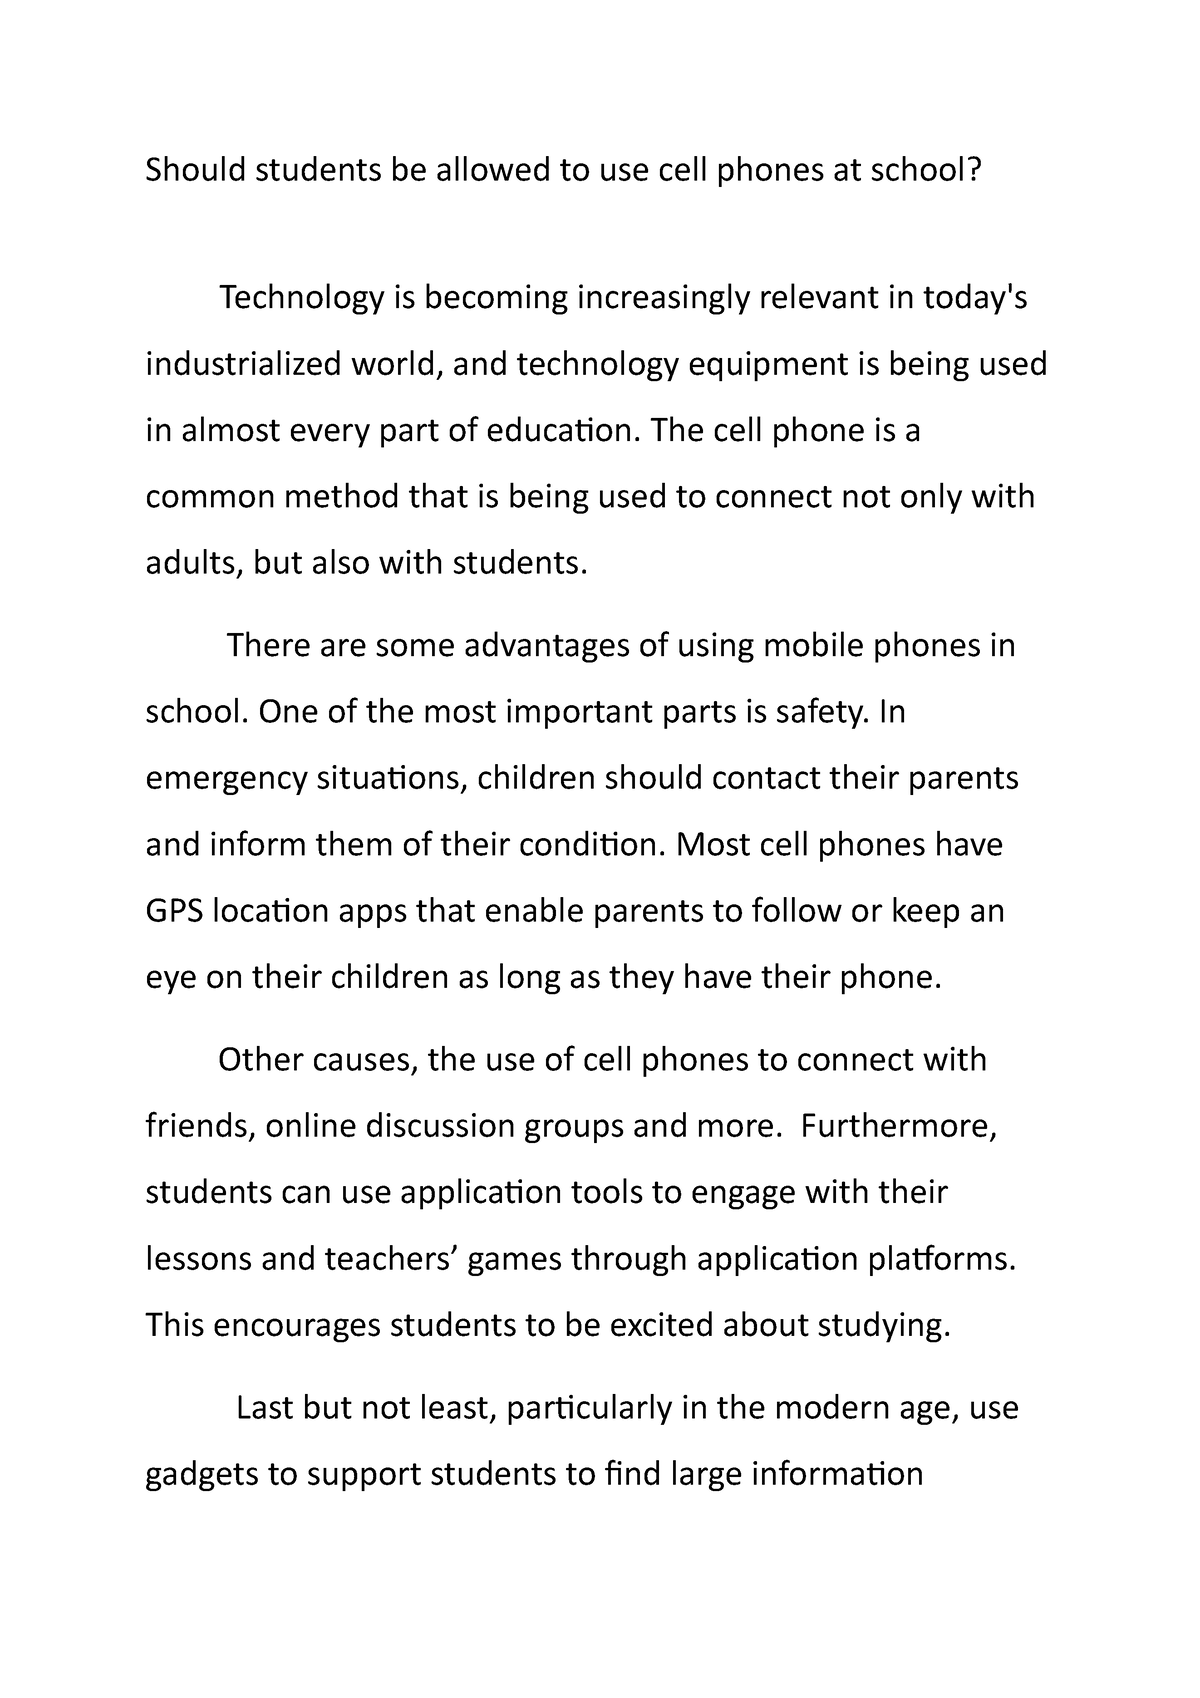 use of cell phone at school essay 200 words